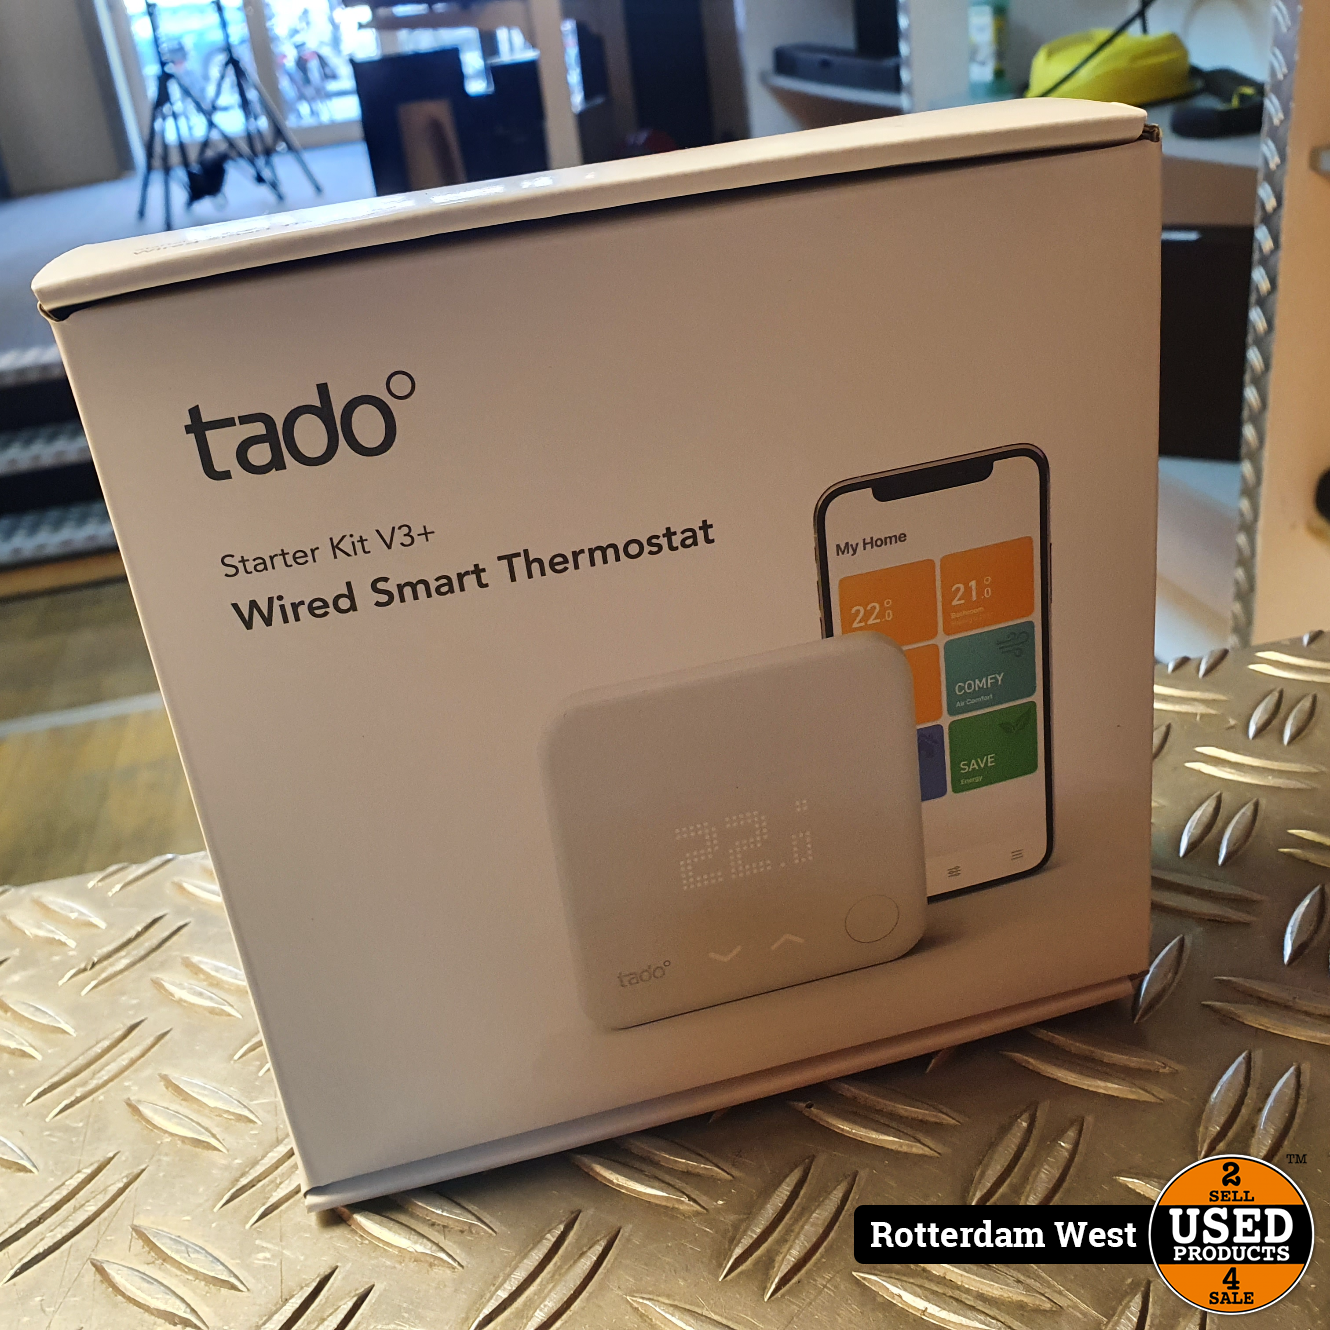 Tado Bedrade Slimme Thermostaat - Starterskit V3+ // Nieuw - Used Products  Rotterdam West